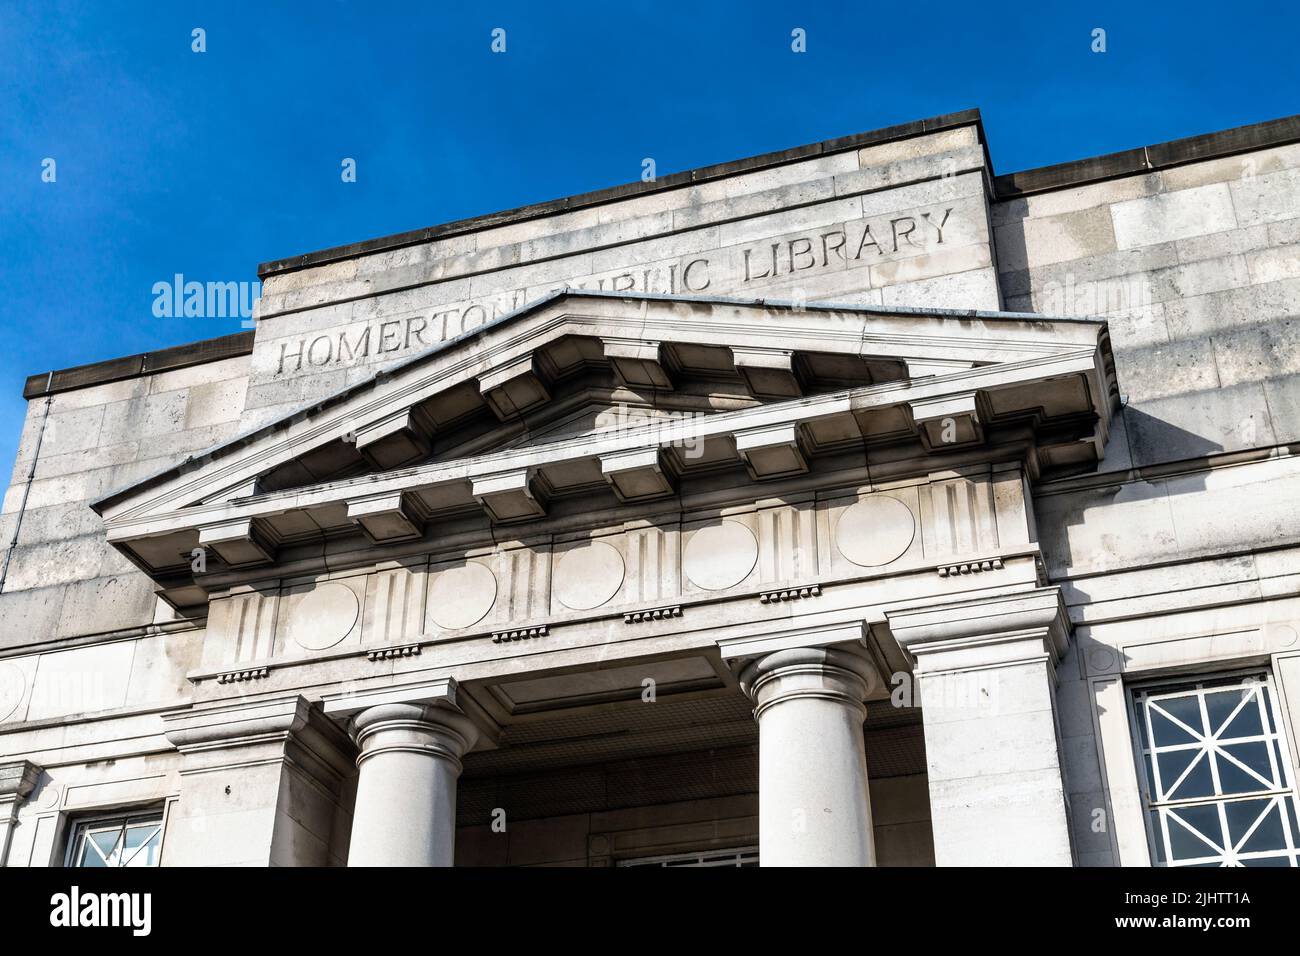 Exterior of neoclassical Chats Palace Arts Centre in Homerton, London, UK Stock Photo